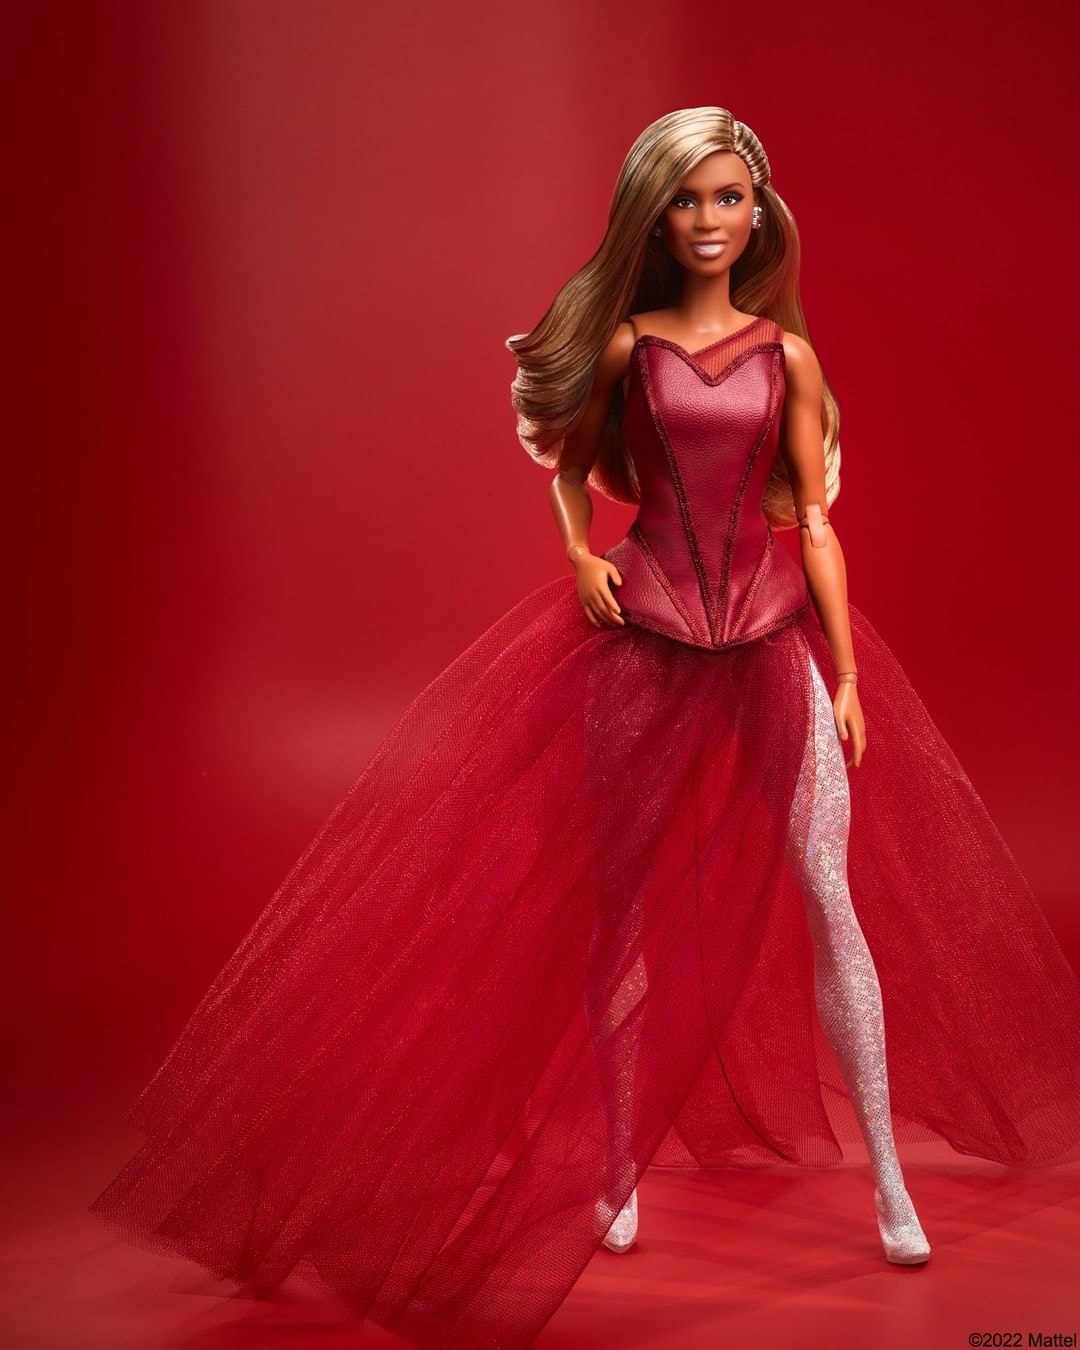 Laverne Cox is honored as the first transgender Barbie in a burgundy corset featuring a long, sheer skirt